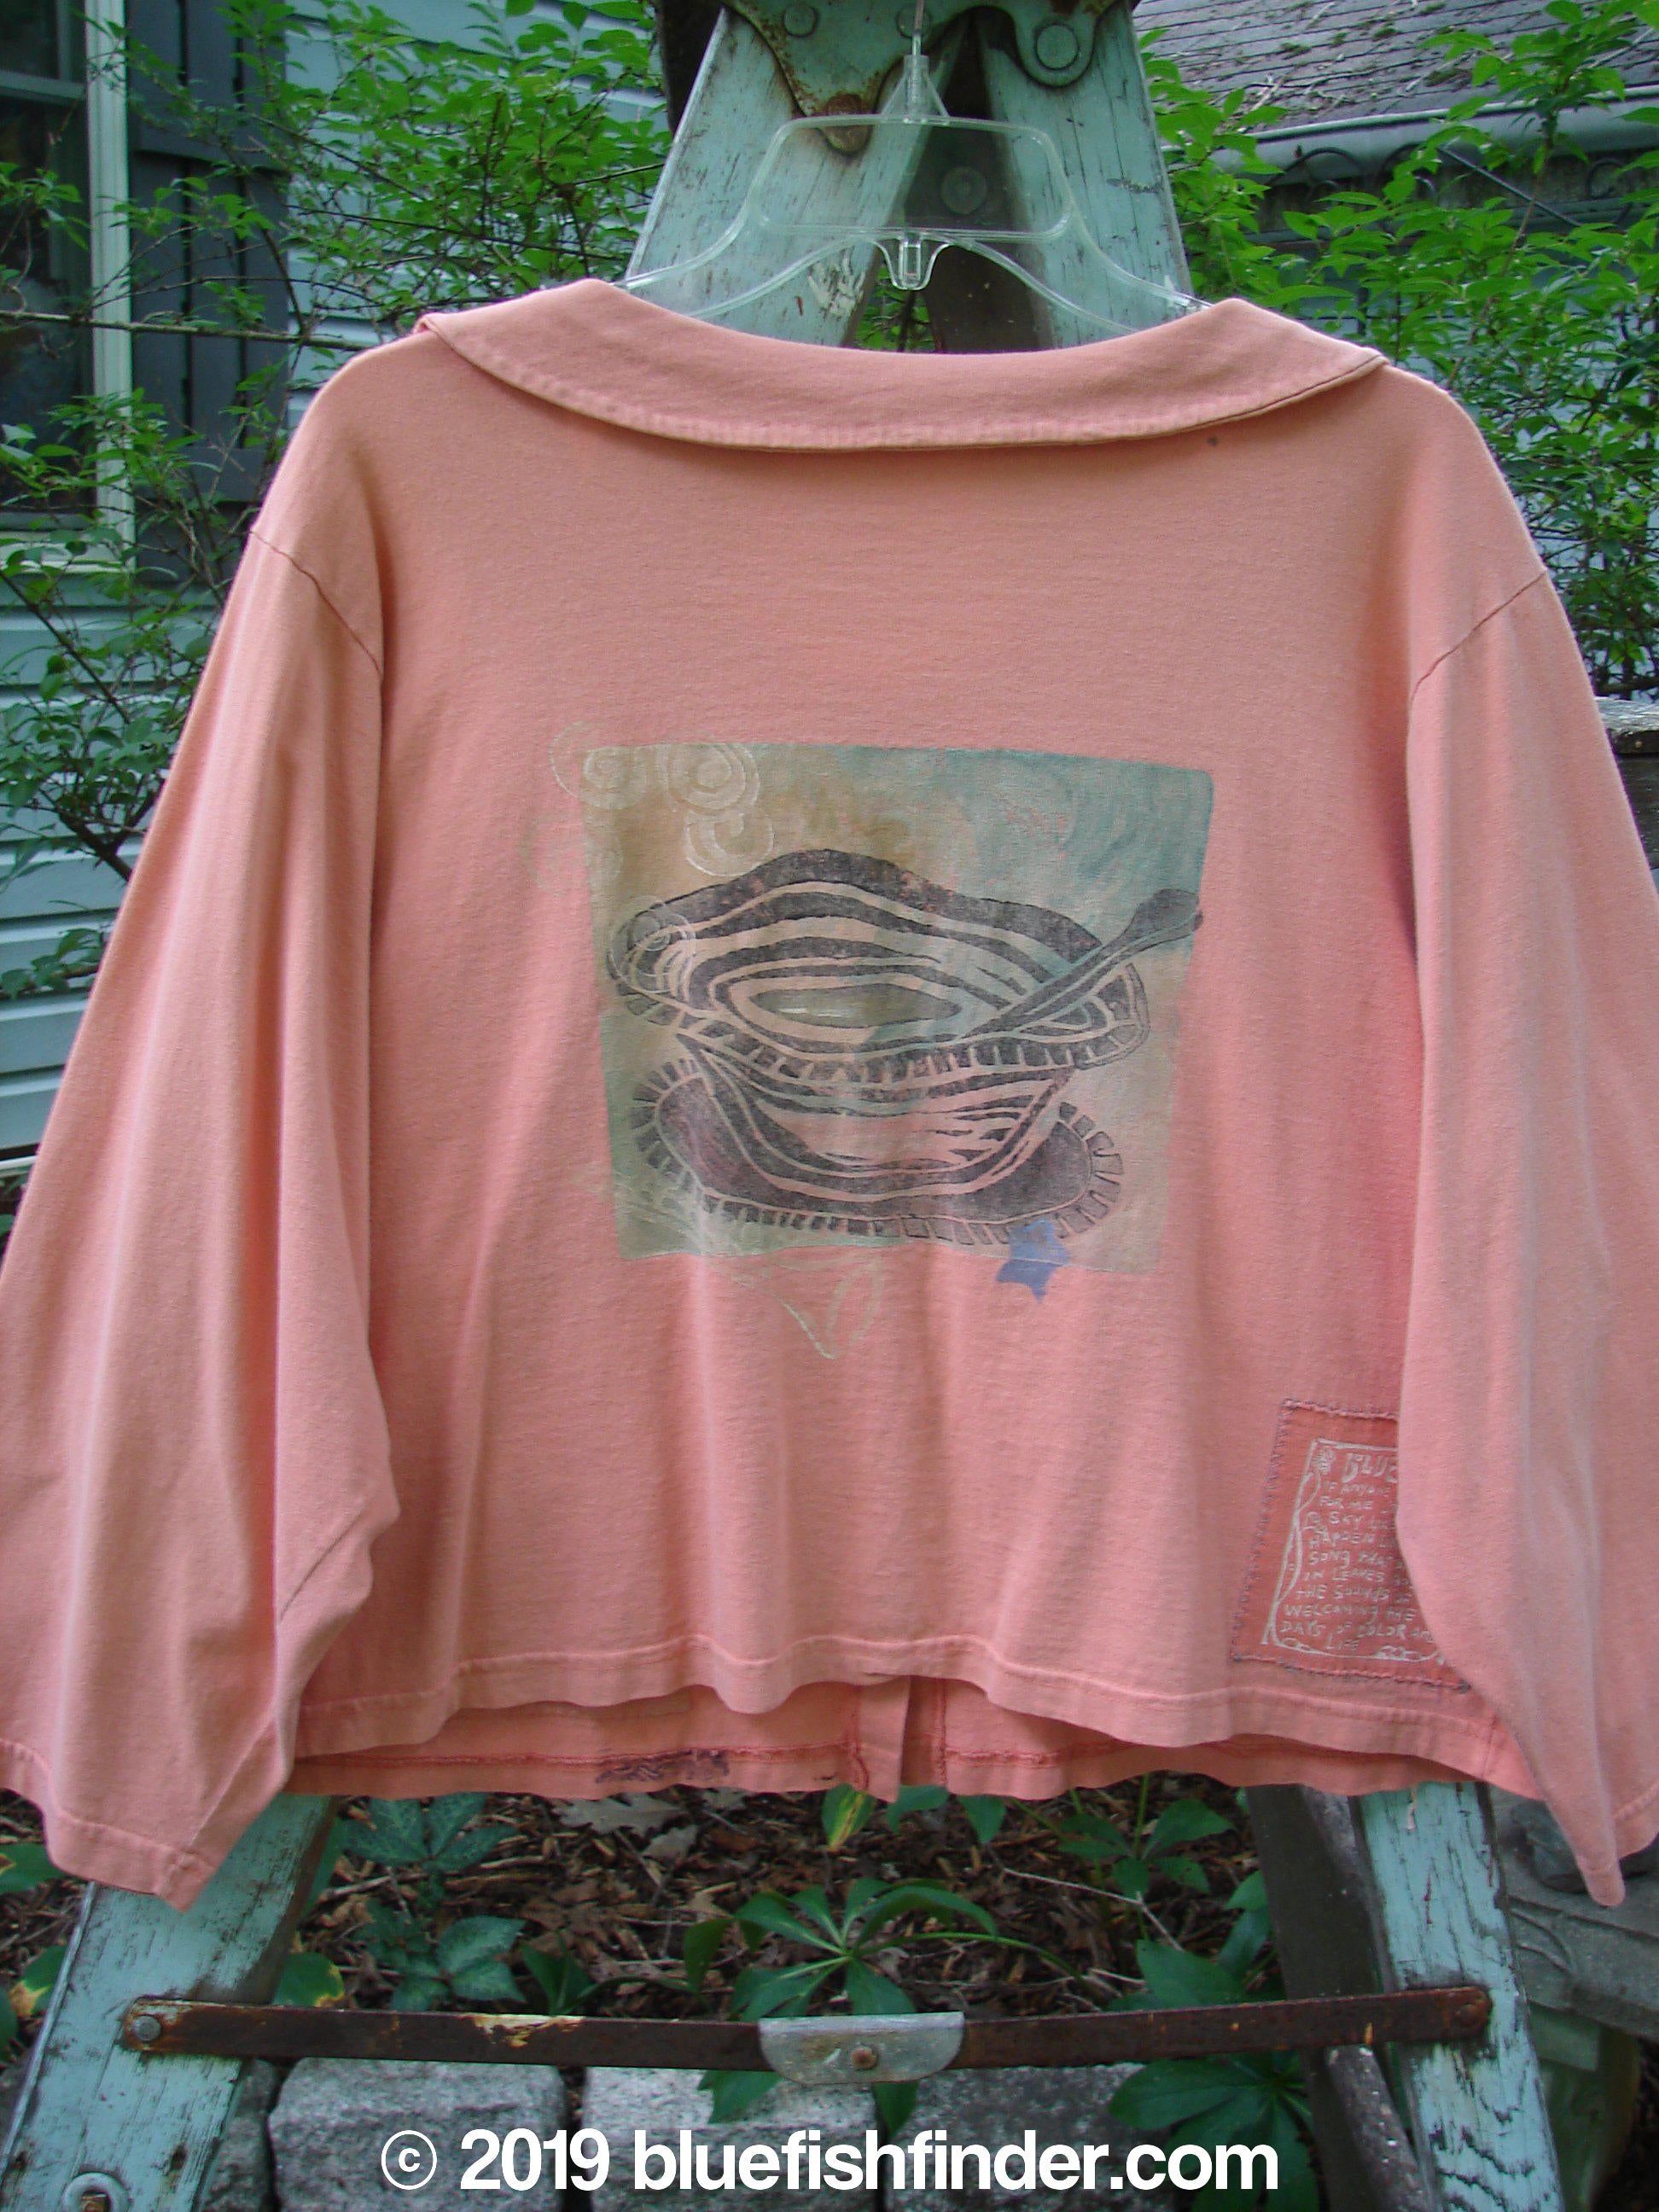 1994 Box Pocket Jacket Reef Harp Star Size 1: A pink jacket with a picture on it, featuring a close-up of a plant, a drawing of a bowl, and a close-up of a fish.